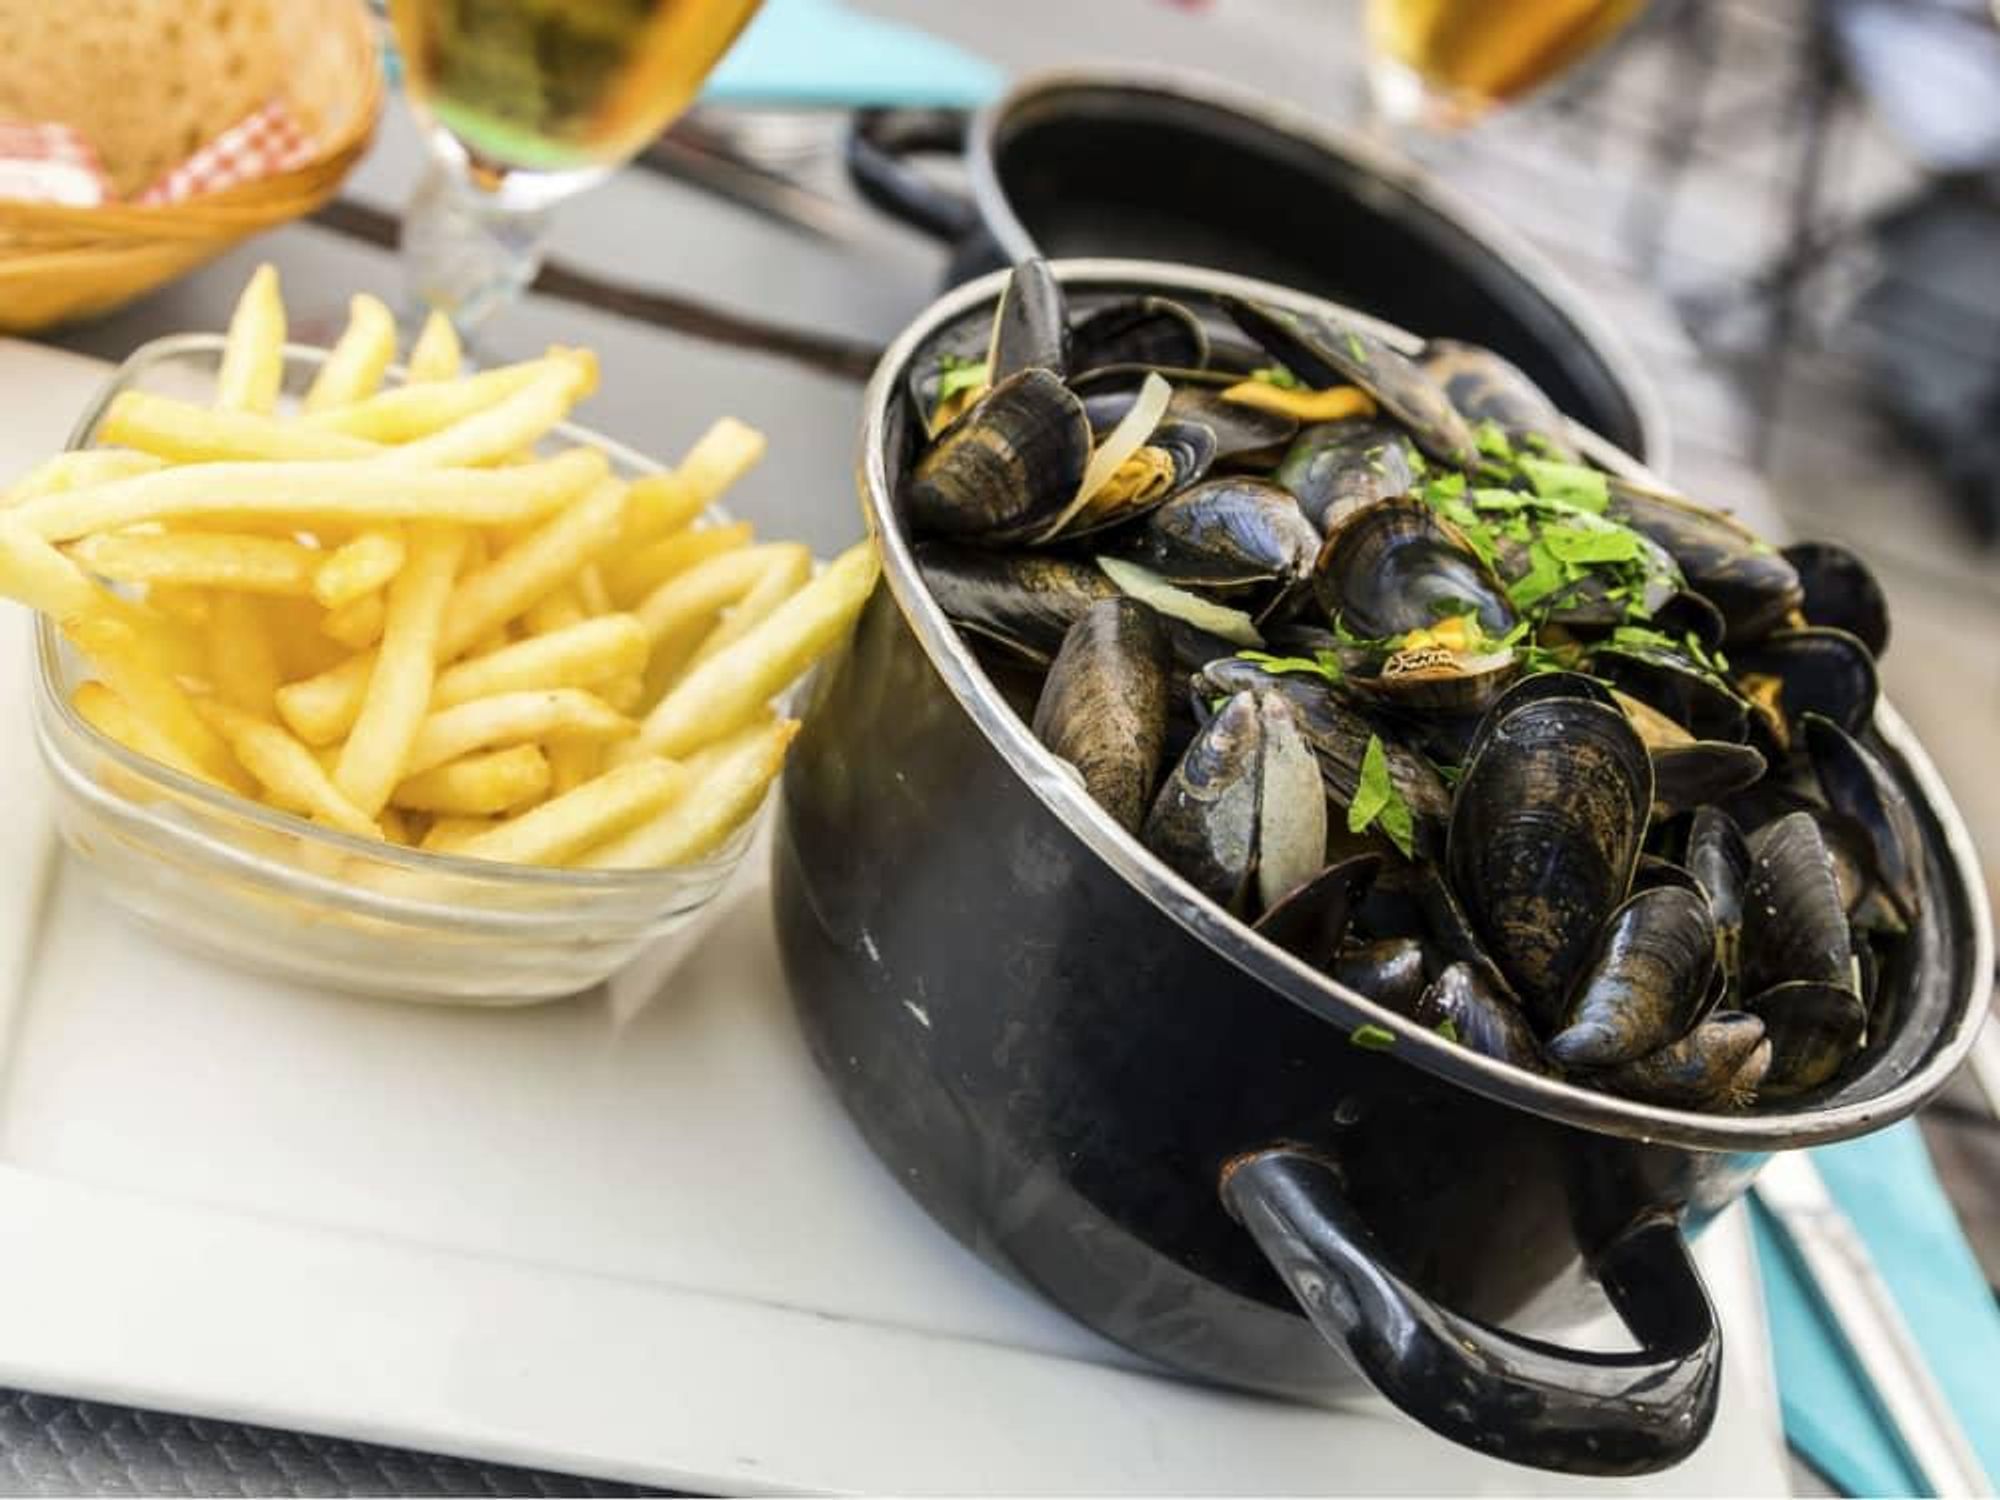 Mussels and frites (fries)